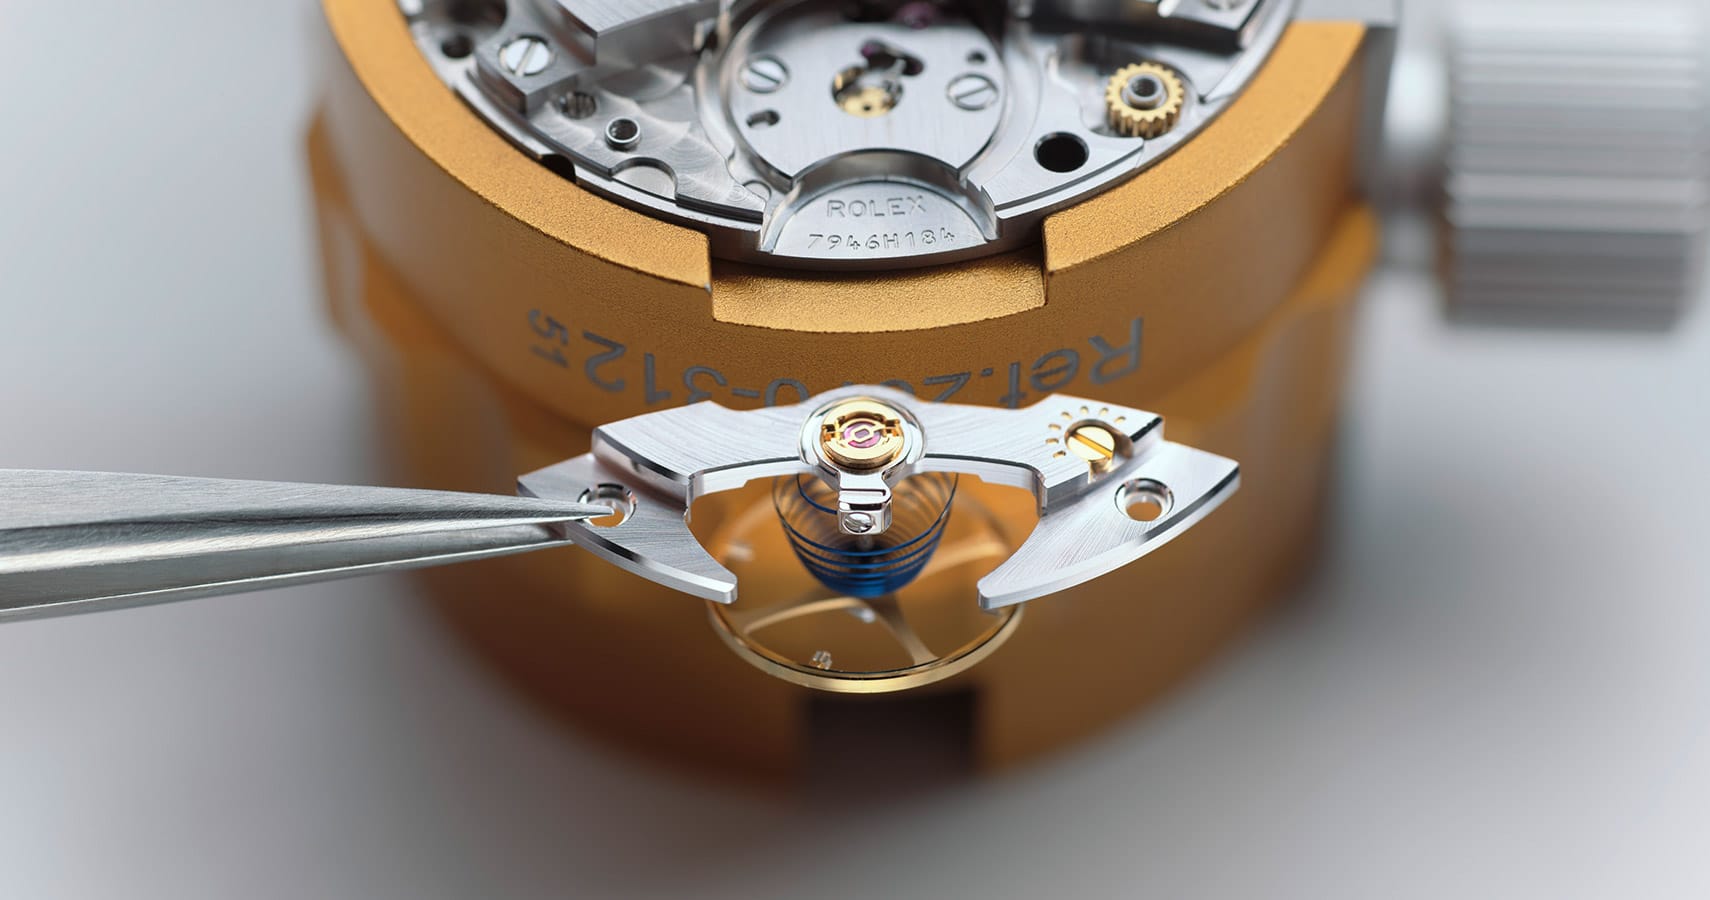 Rolex servicing procedure assembly lubrication of the movement.